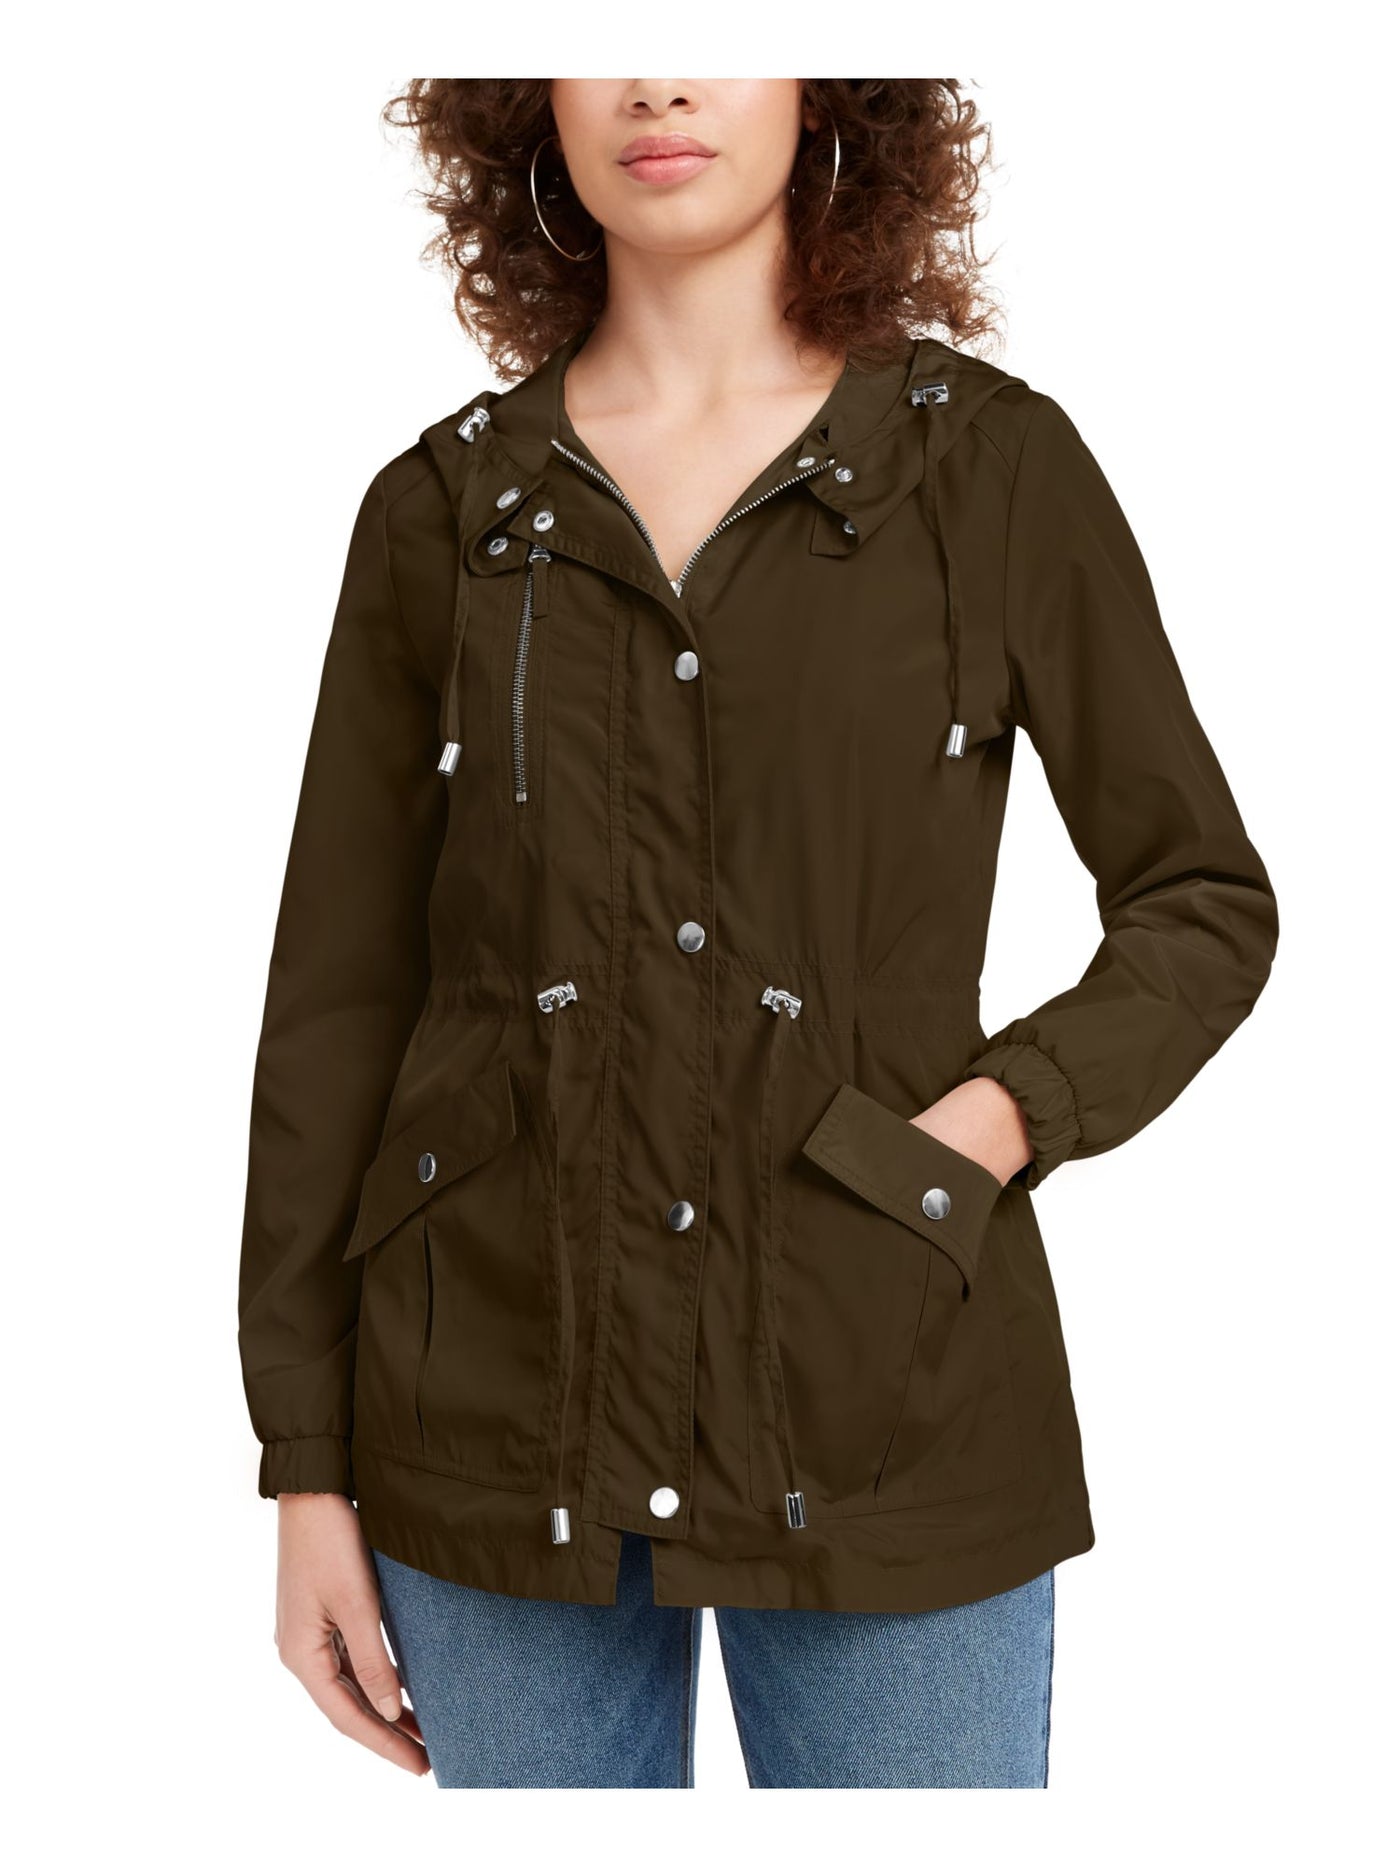 MARALYN & ME Womens Pocketed Zippered Anorak Hooded Button Down Jacket